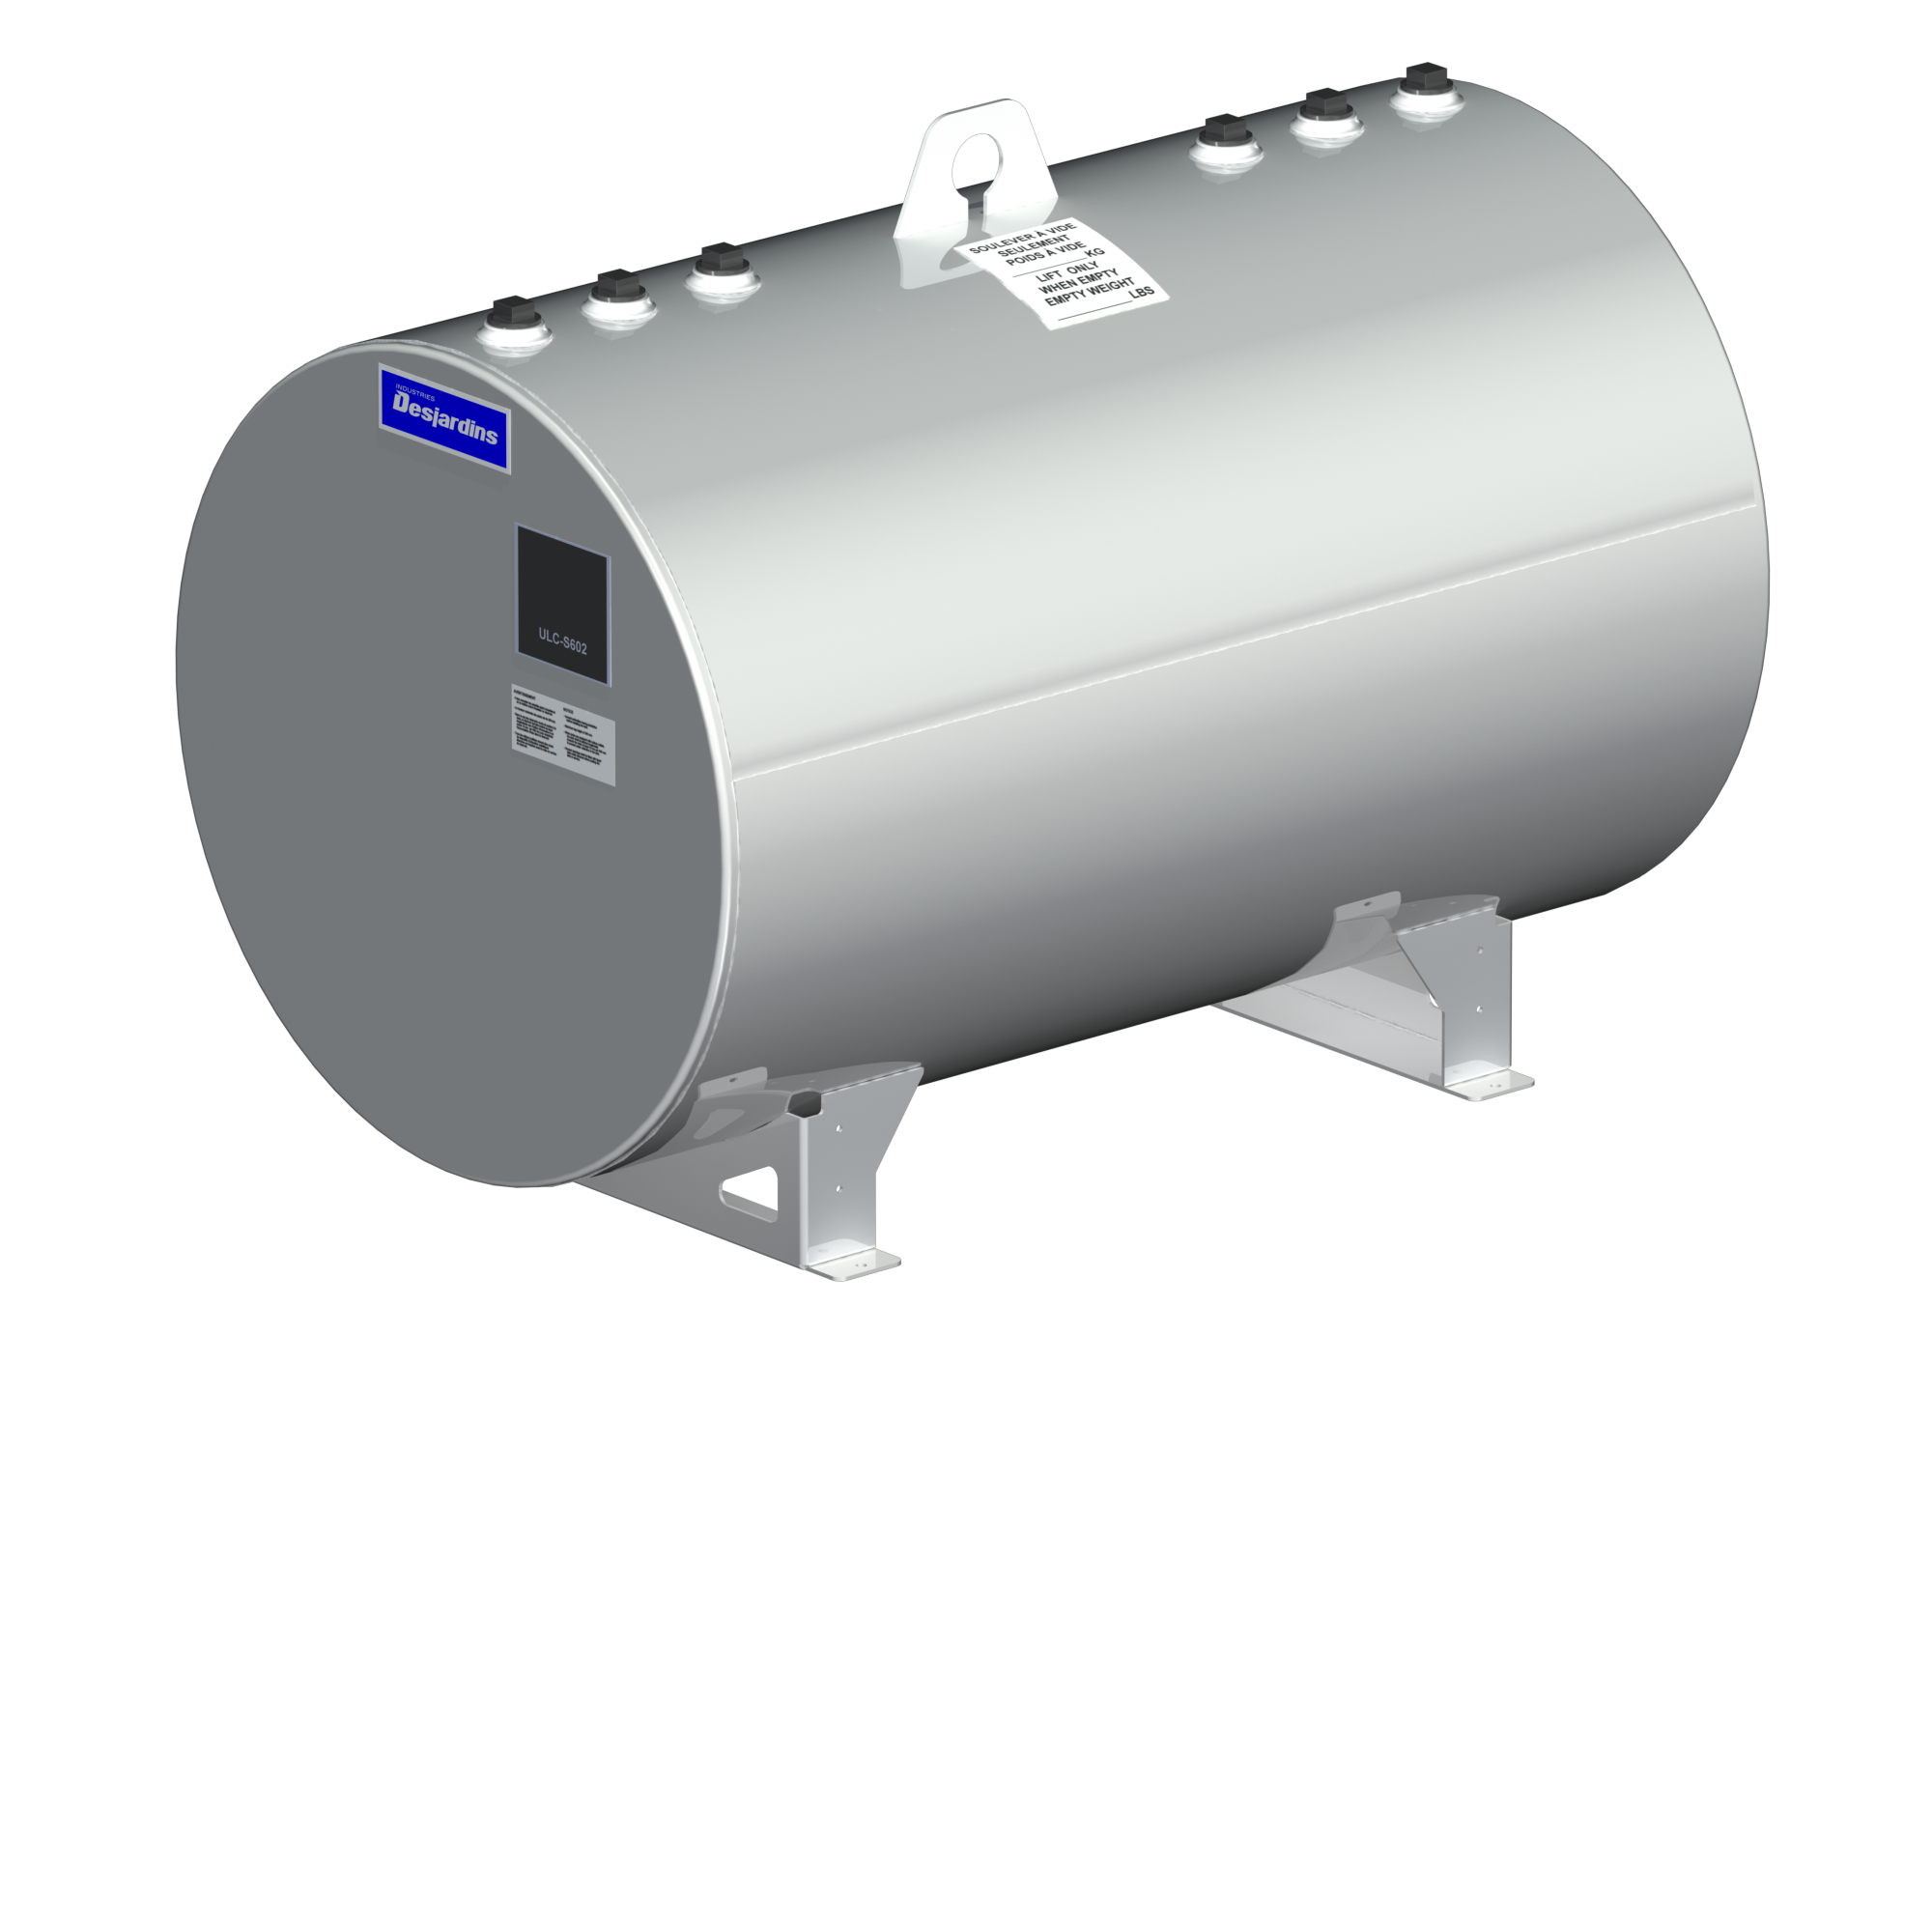 Aboveground tanks for flammable and combustible liquids